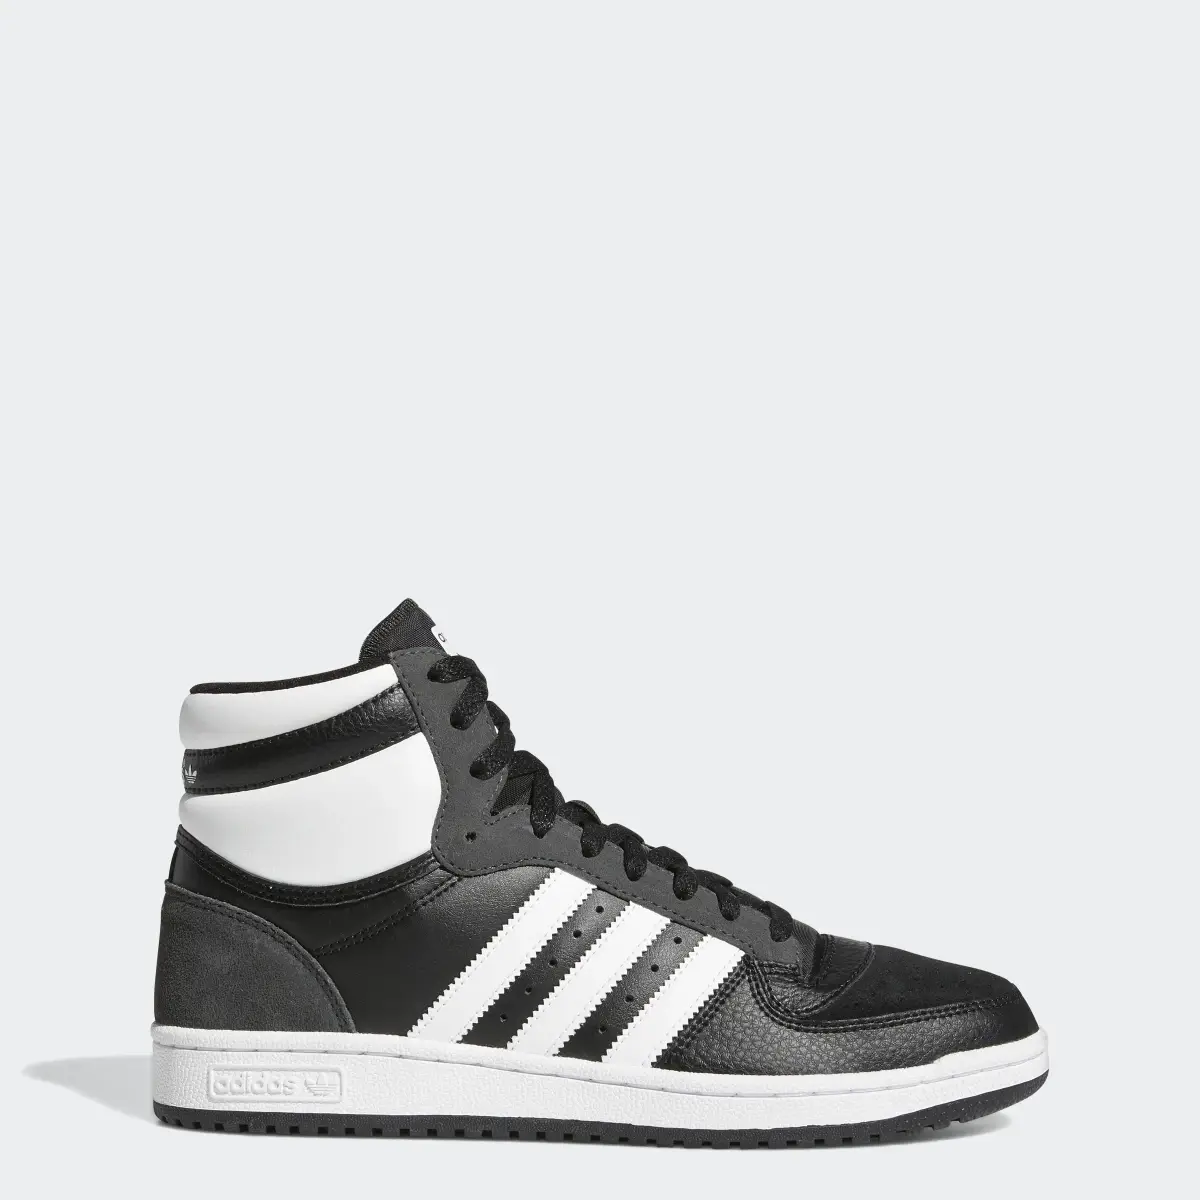 Adidas Top Ten RB Shoes. 1